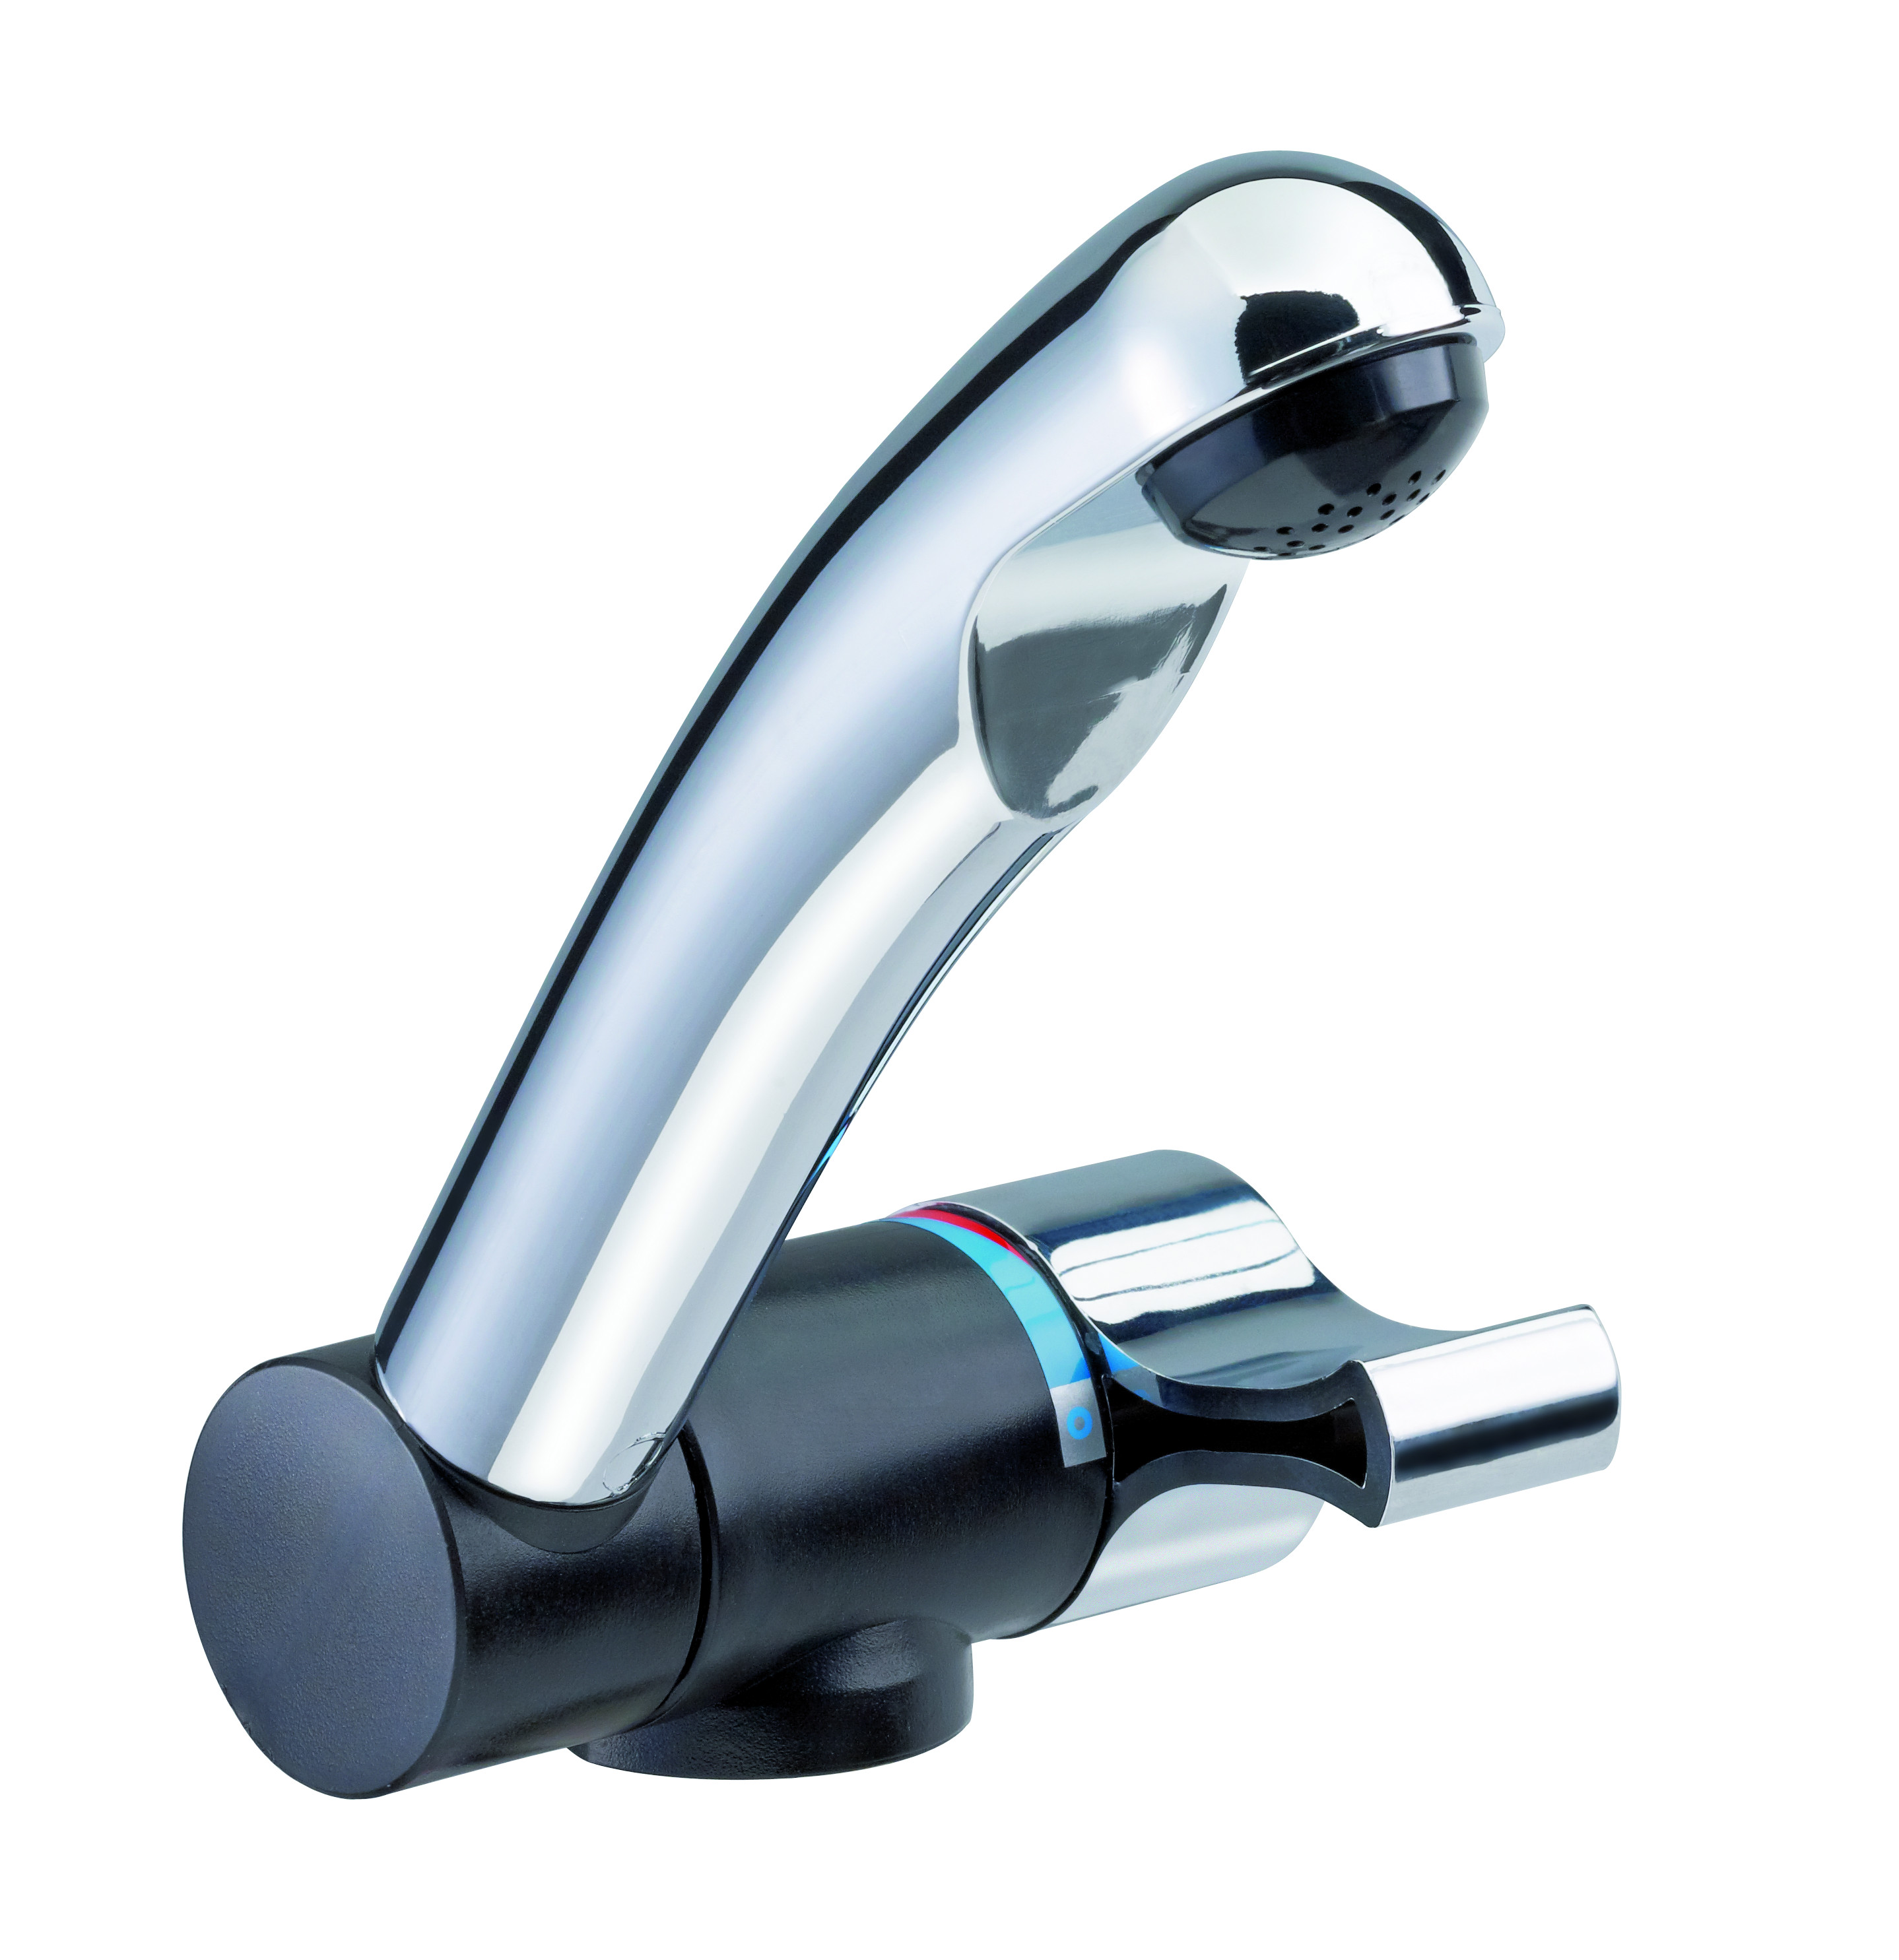 Reich single-lever mixer MONO-MIX-STYLE 2005, vertically rotatable projection, chrome, with microswitch, 27 mm diameter